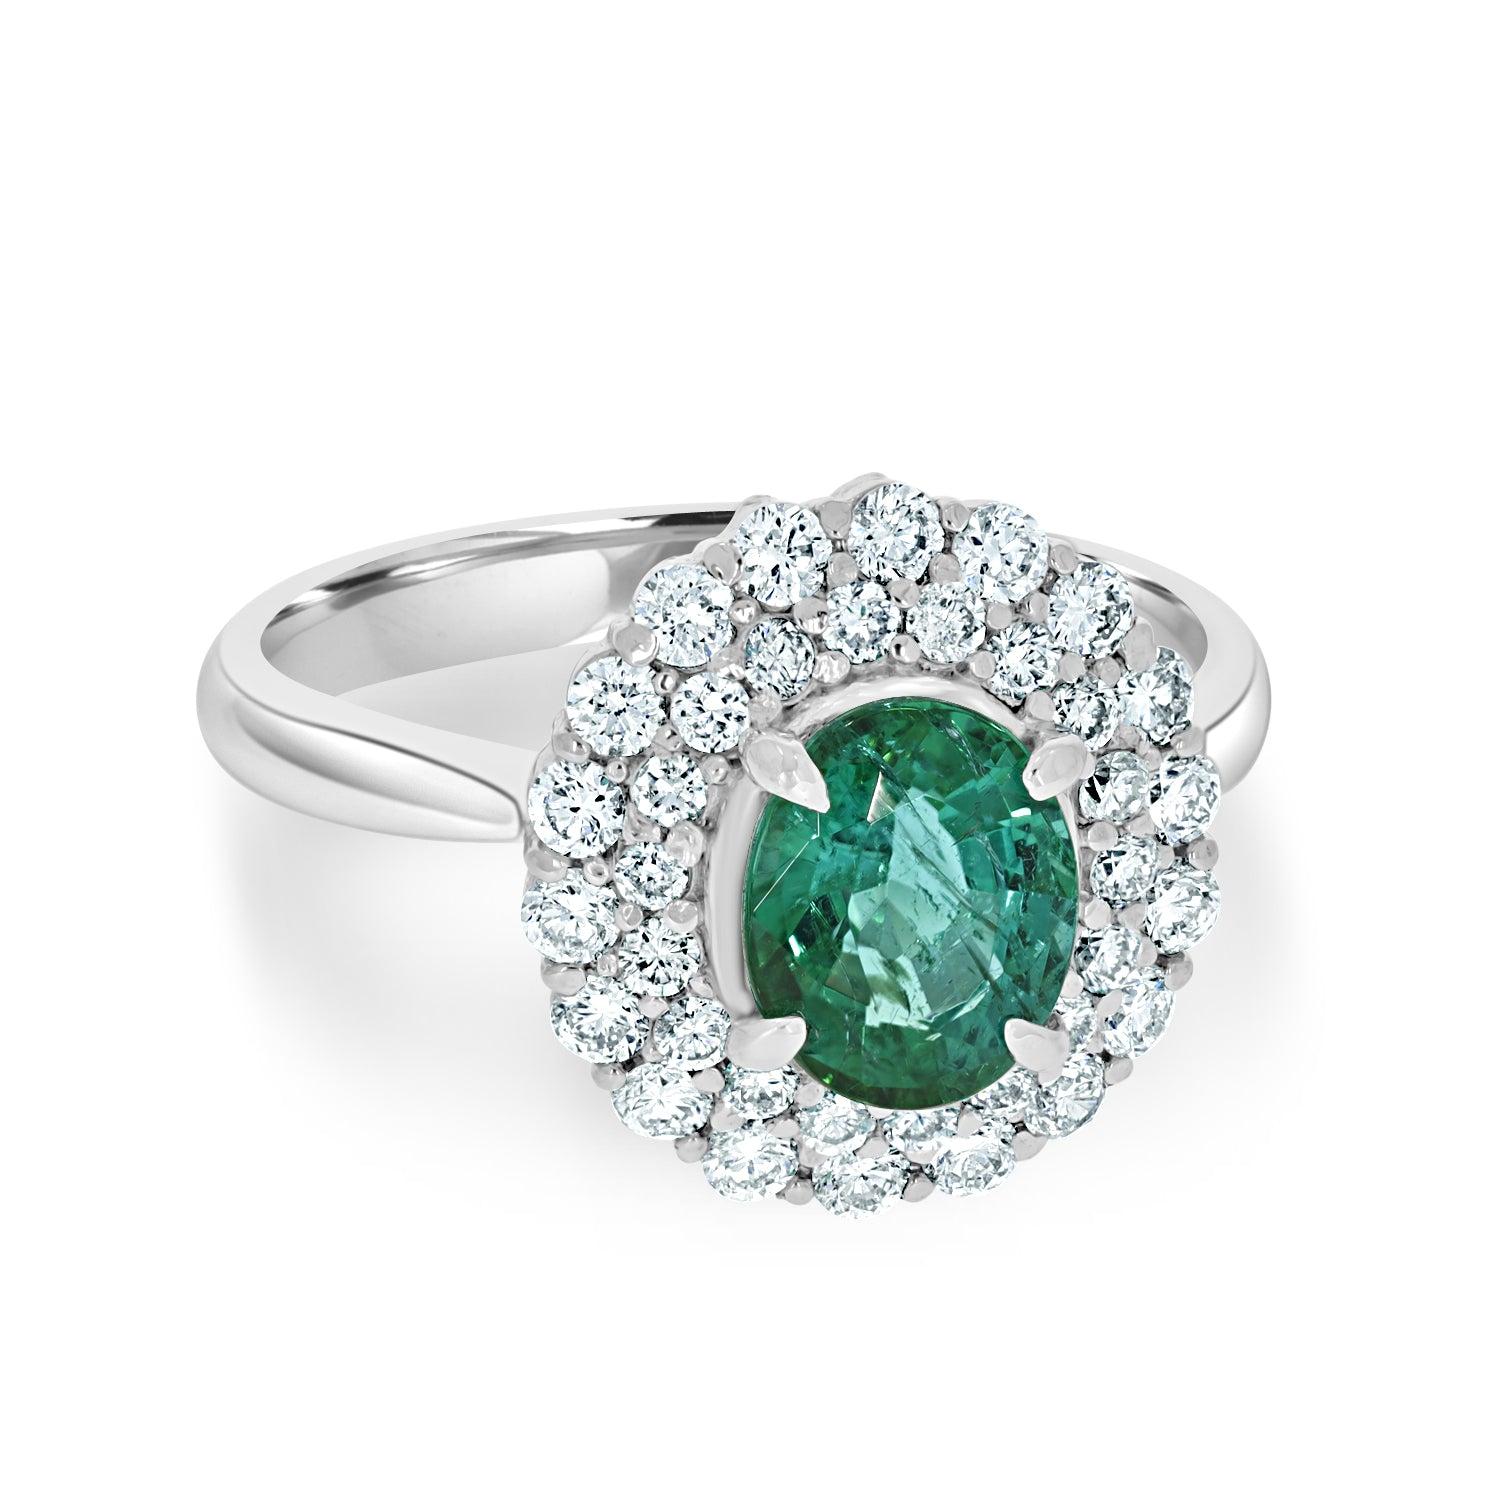 Introducing our stunning GIA Certified 1.07ct Brazilian Paraiba Tourmaline and Diamonds in Platinum Ring, a true masterpiece of fine jewelry. This exquisite ring features a rare and highly sought-after Brazilian Paraiba tourmaline gemstone,